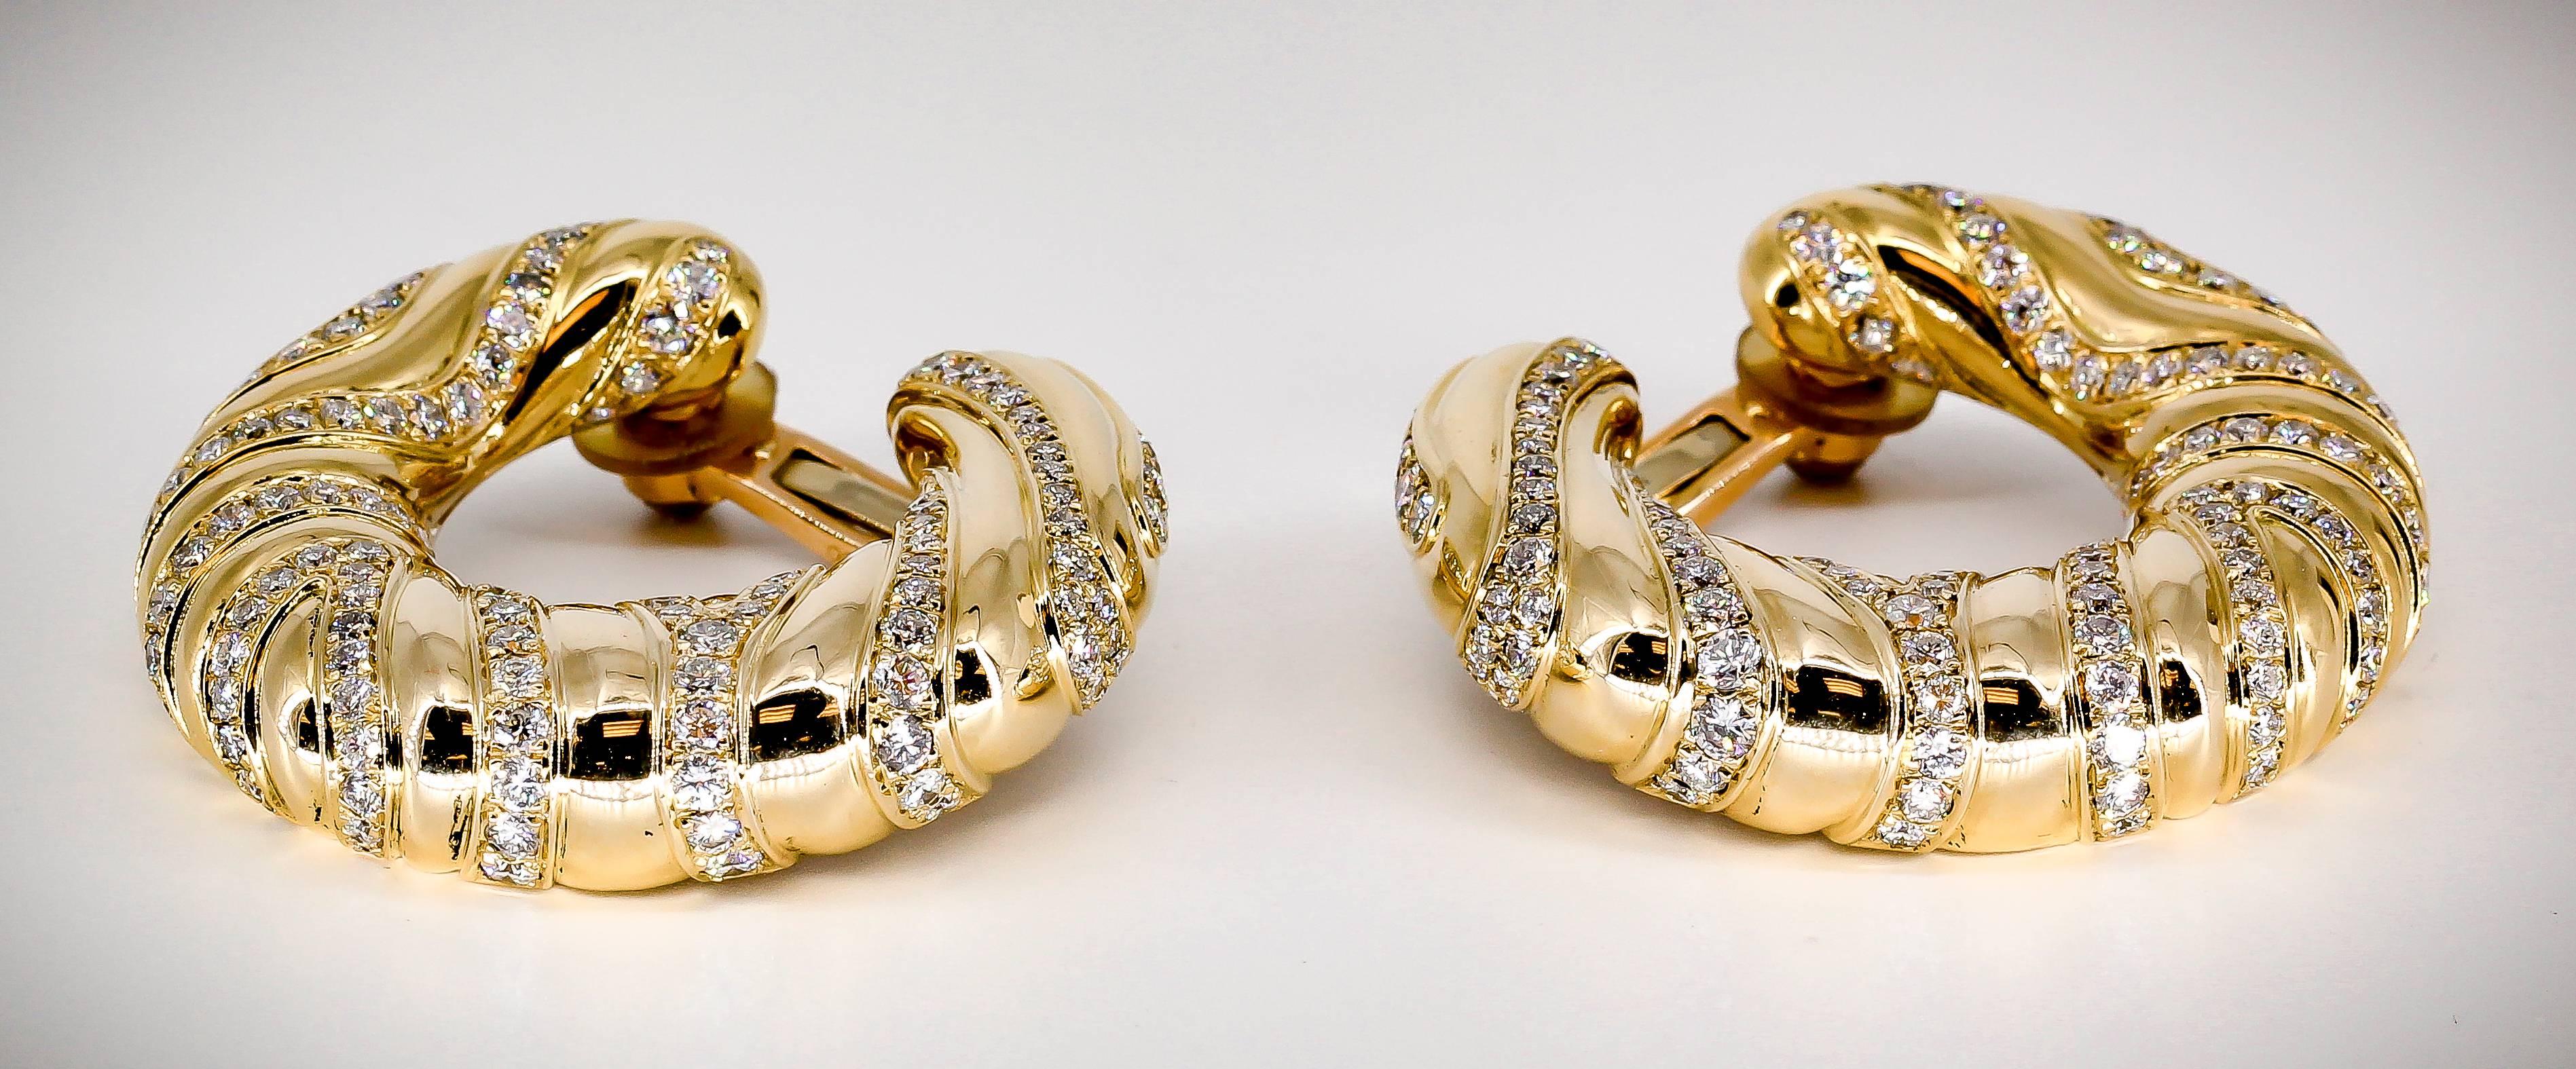 Bold diamond and 18K yellow gold hoop earrings by Cartier. They feature high grade round brilliant cut diamonds throughout, approx. 7-8 carats total weight. 

Hallmarks: Cartier, 750, reference numbers.